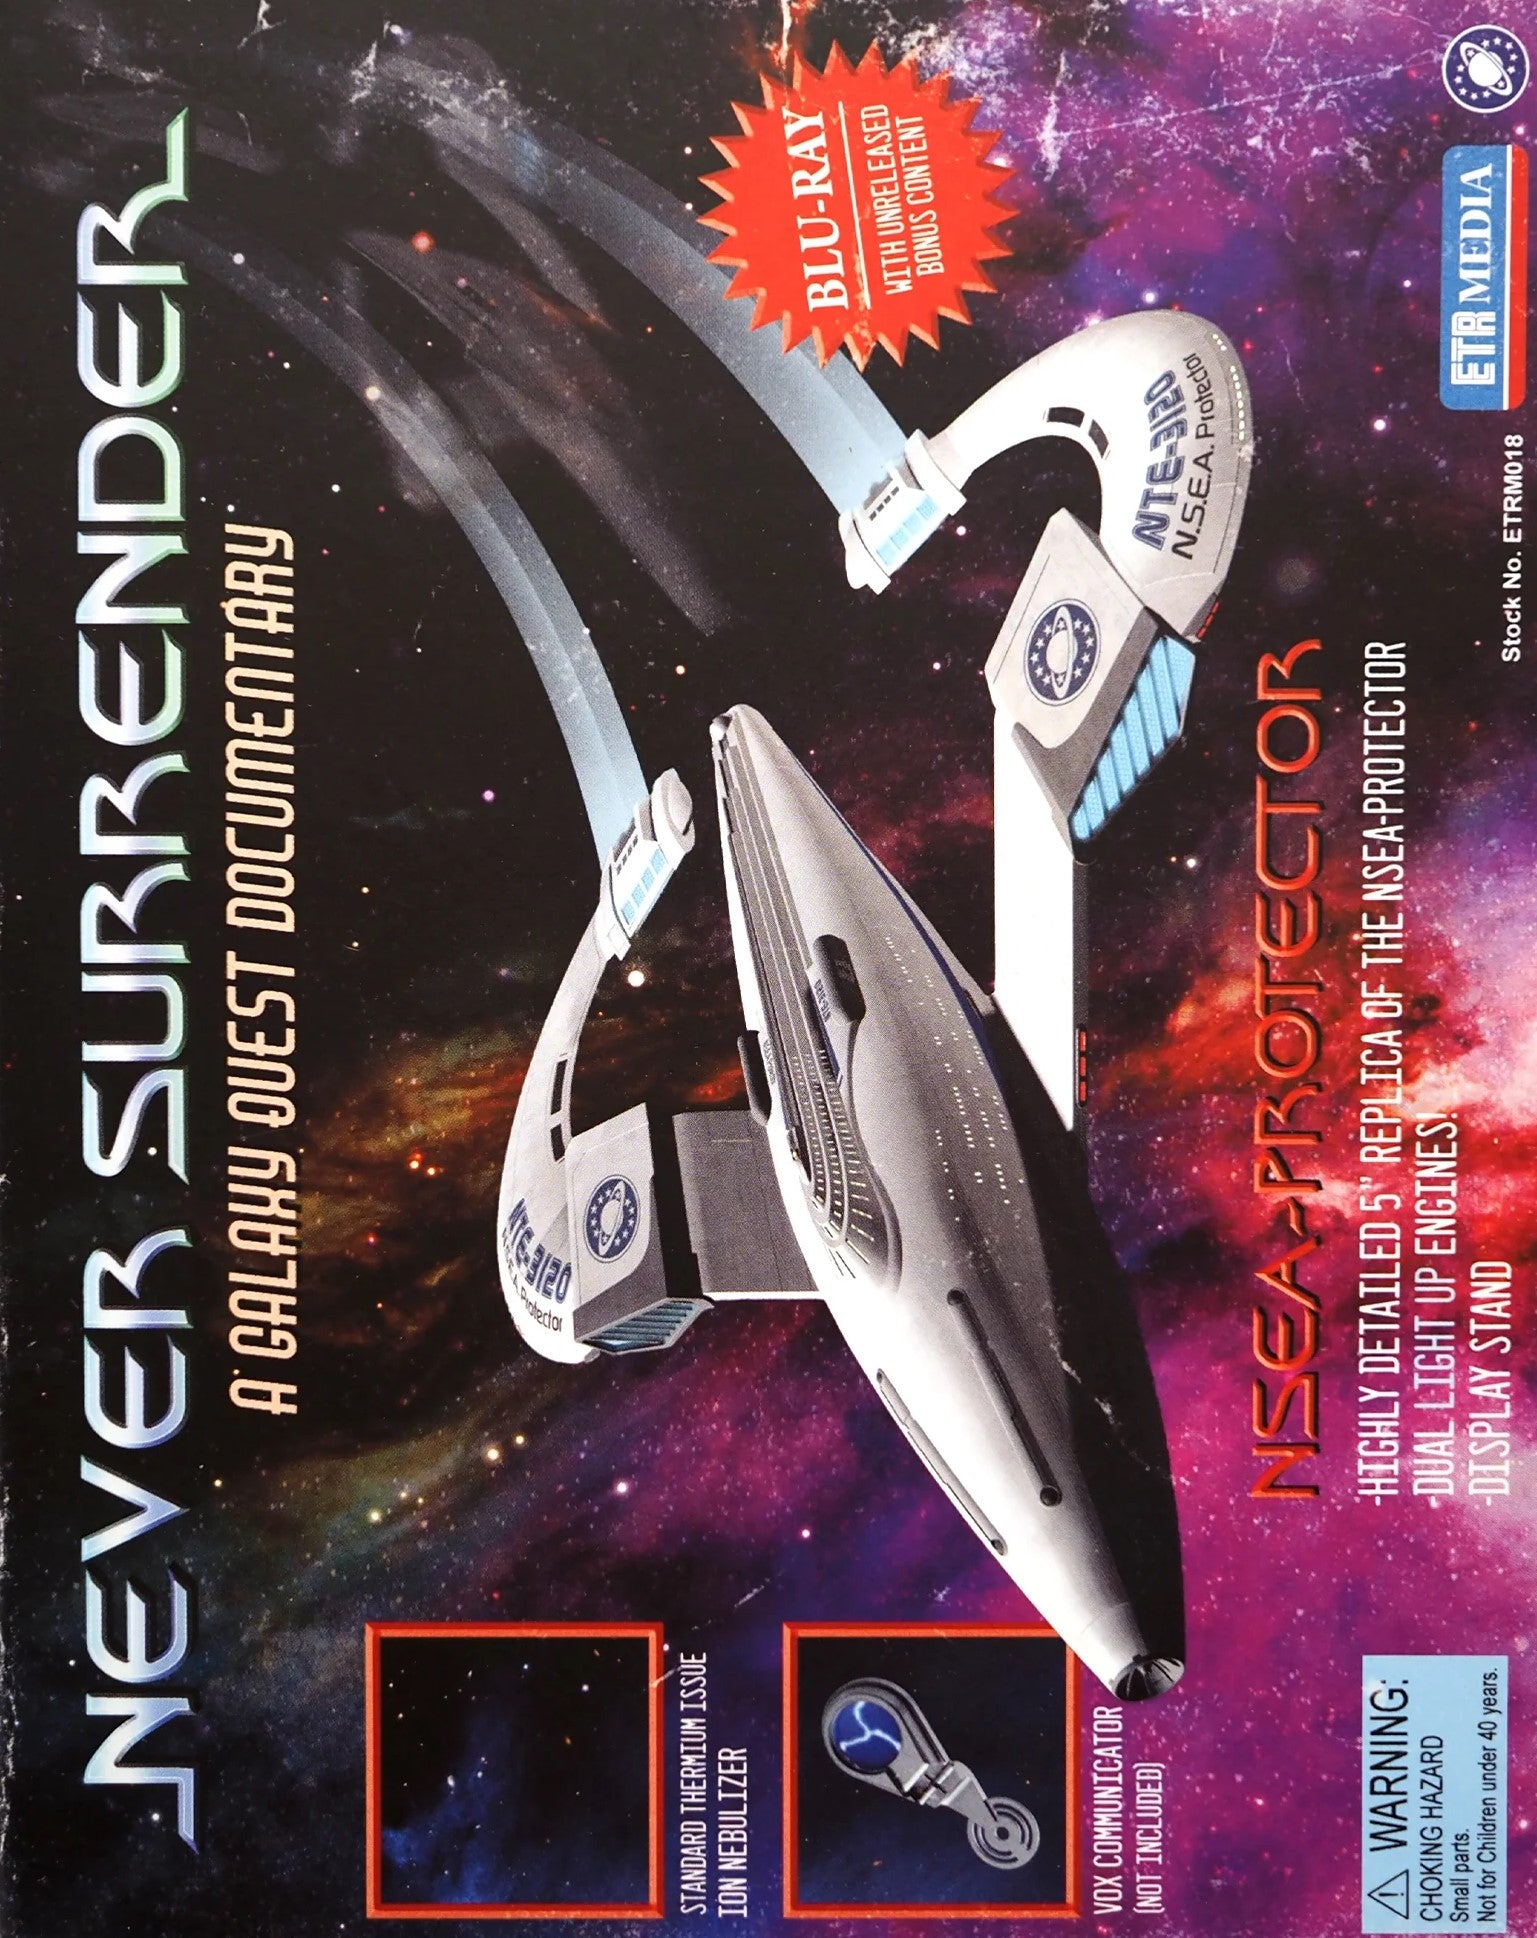 NEVER SURRENDER: A GALAXY QUEST DOCUMENTARY (LIMITED EDITION) BLU-RAY